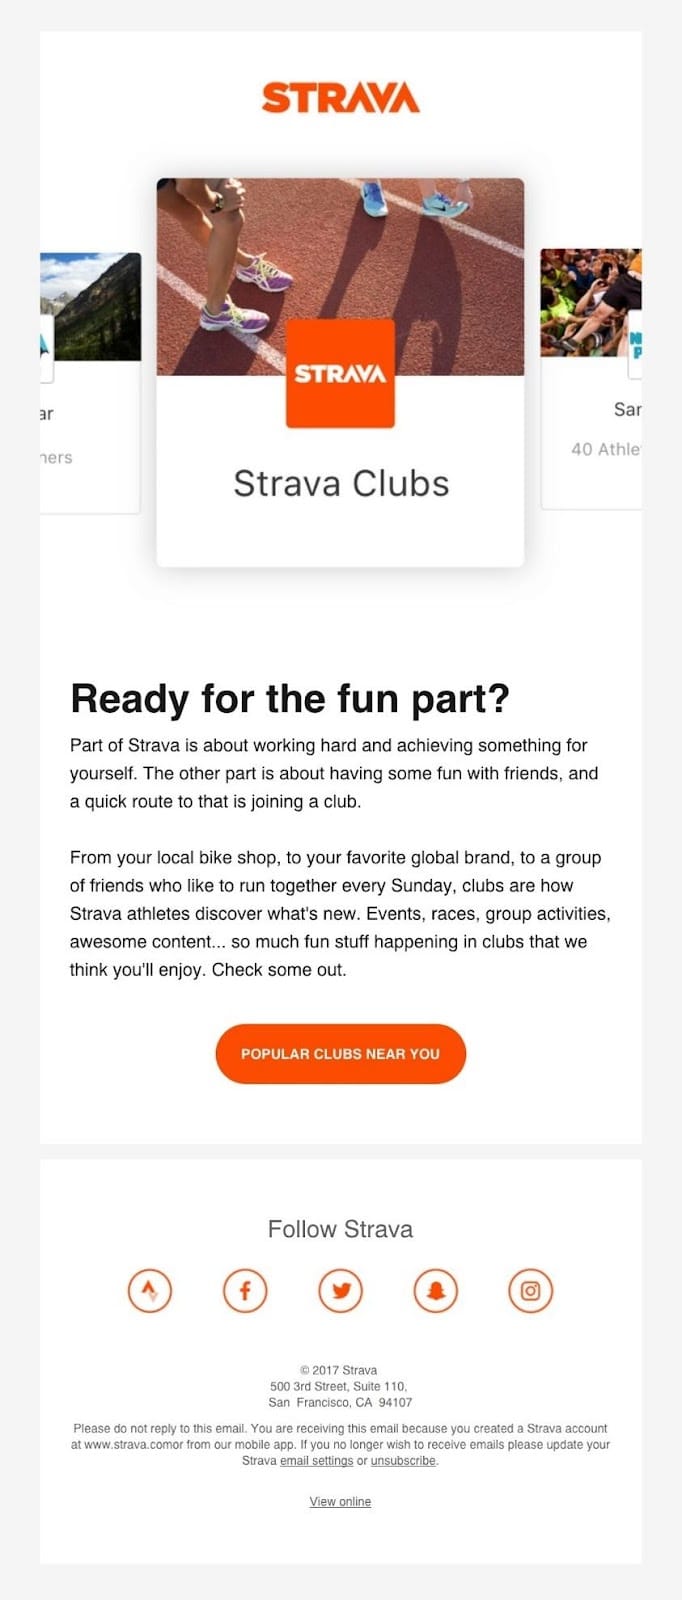 Strava does a great job of working segmentation by offering their subscribers an opportunity to find “clubs” near them. 